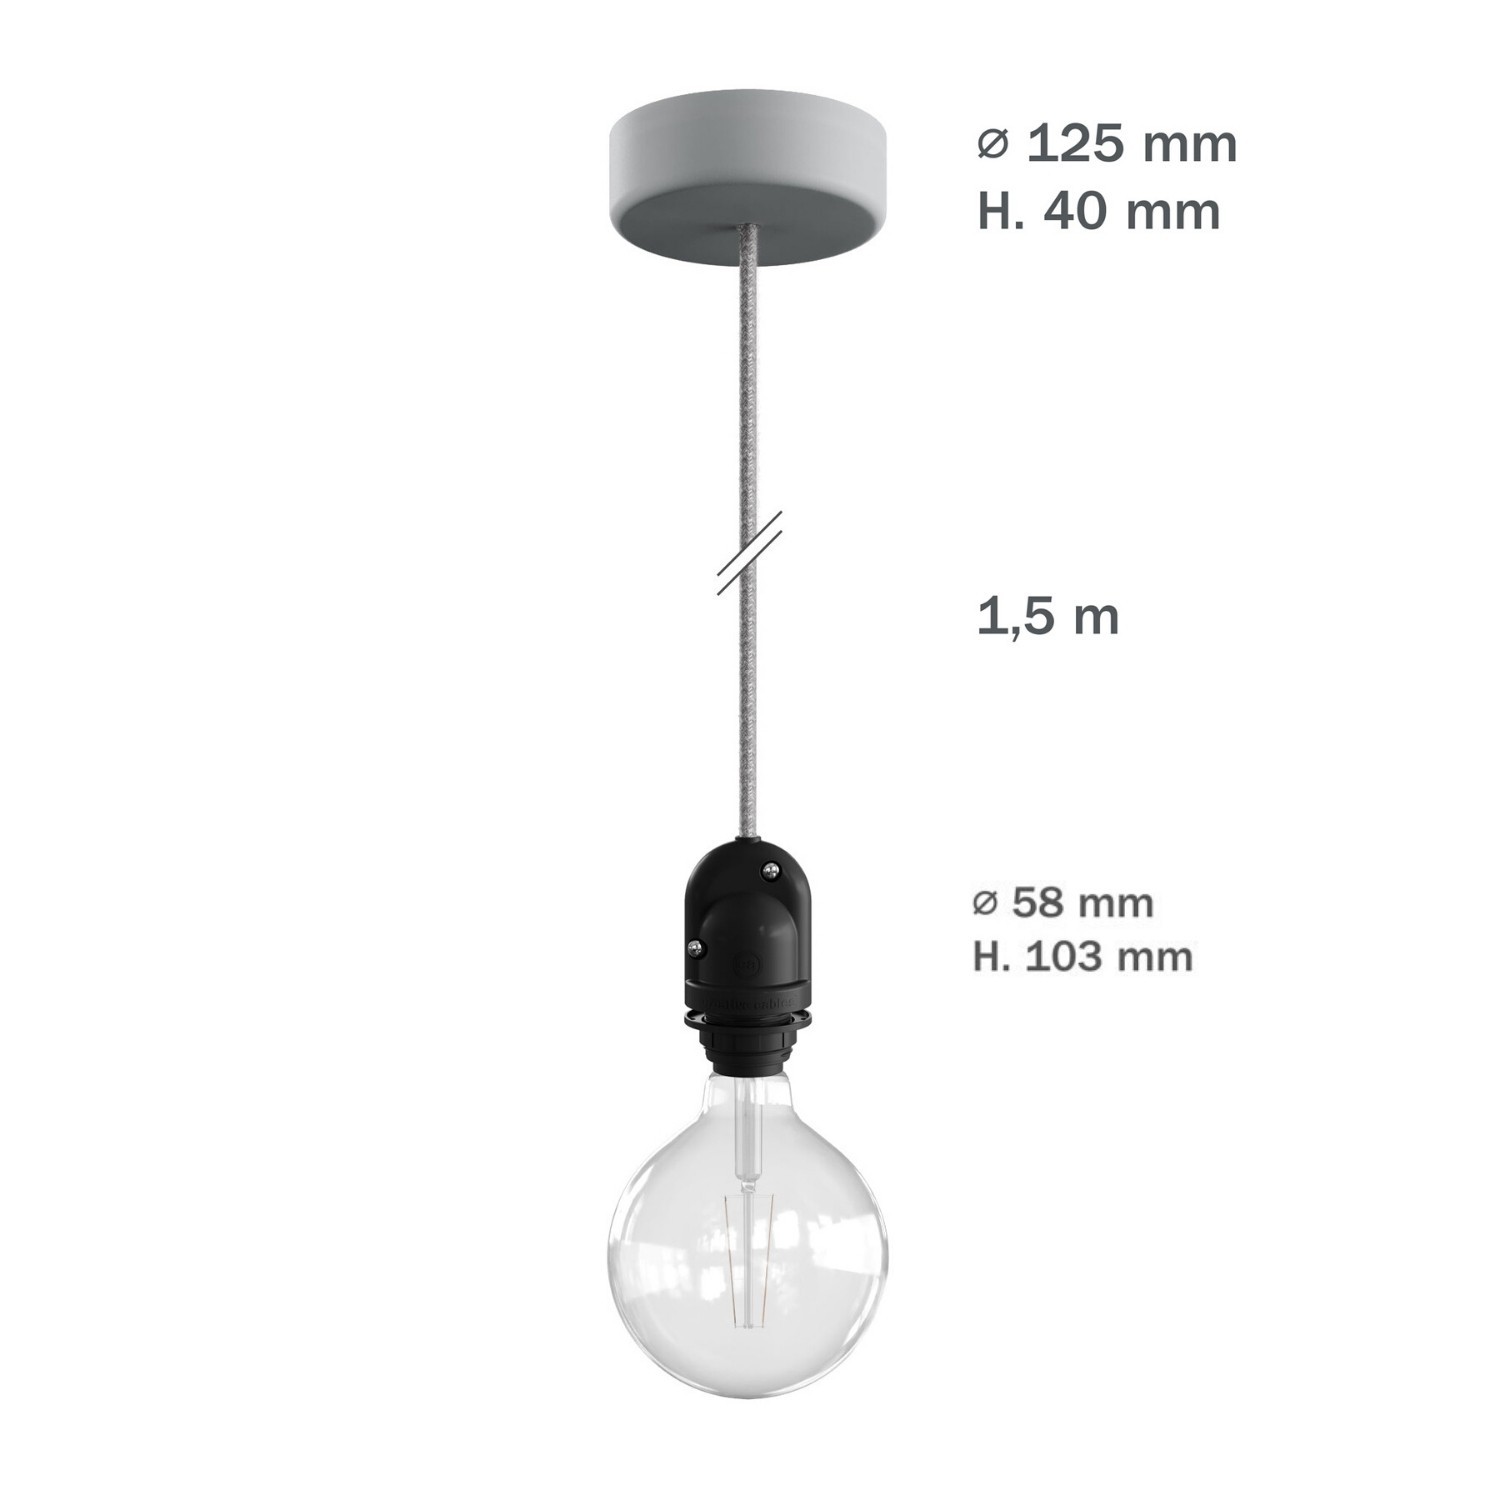 EIVA Outdoor pendant lamp for lampshades with 1,5 mt fabric cable, silicone ceiling rose and lamp holder IP65 water resistant